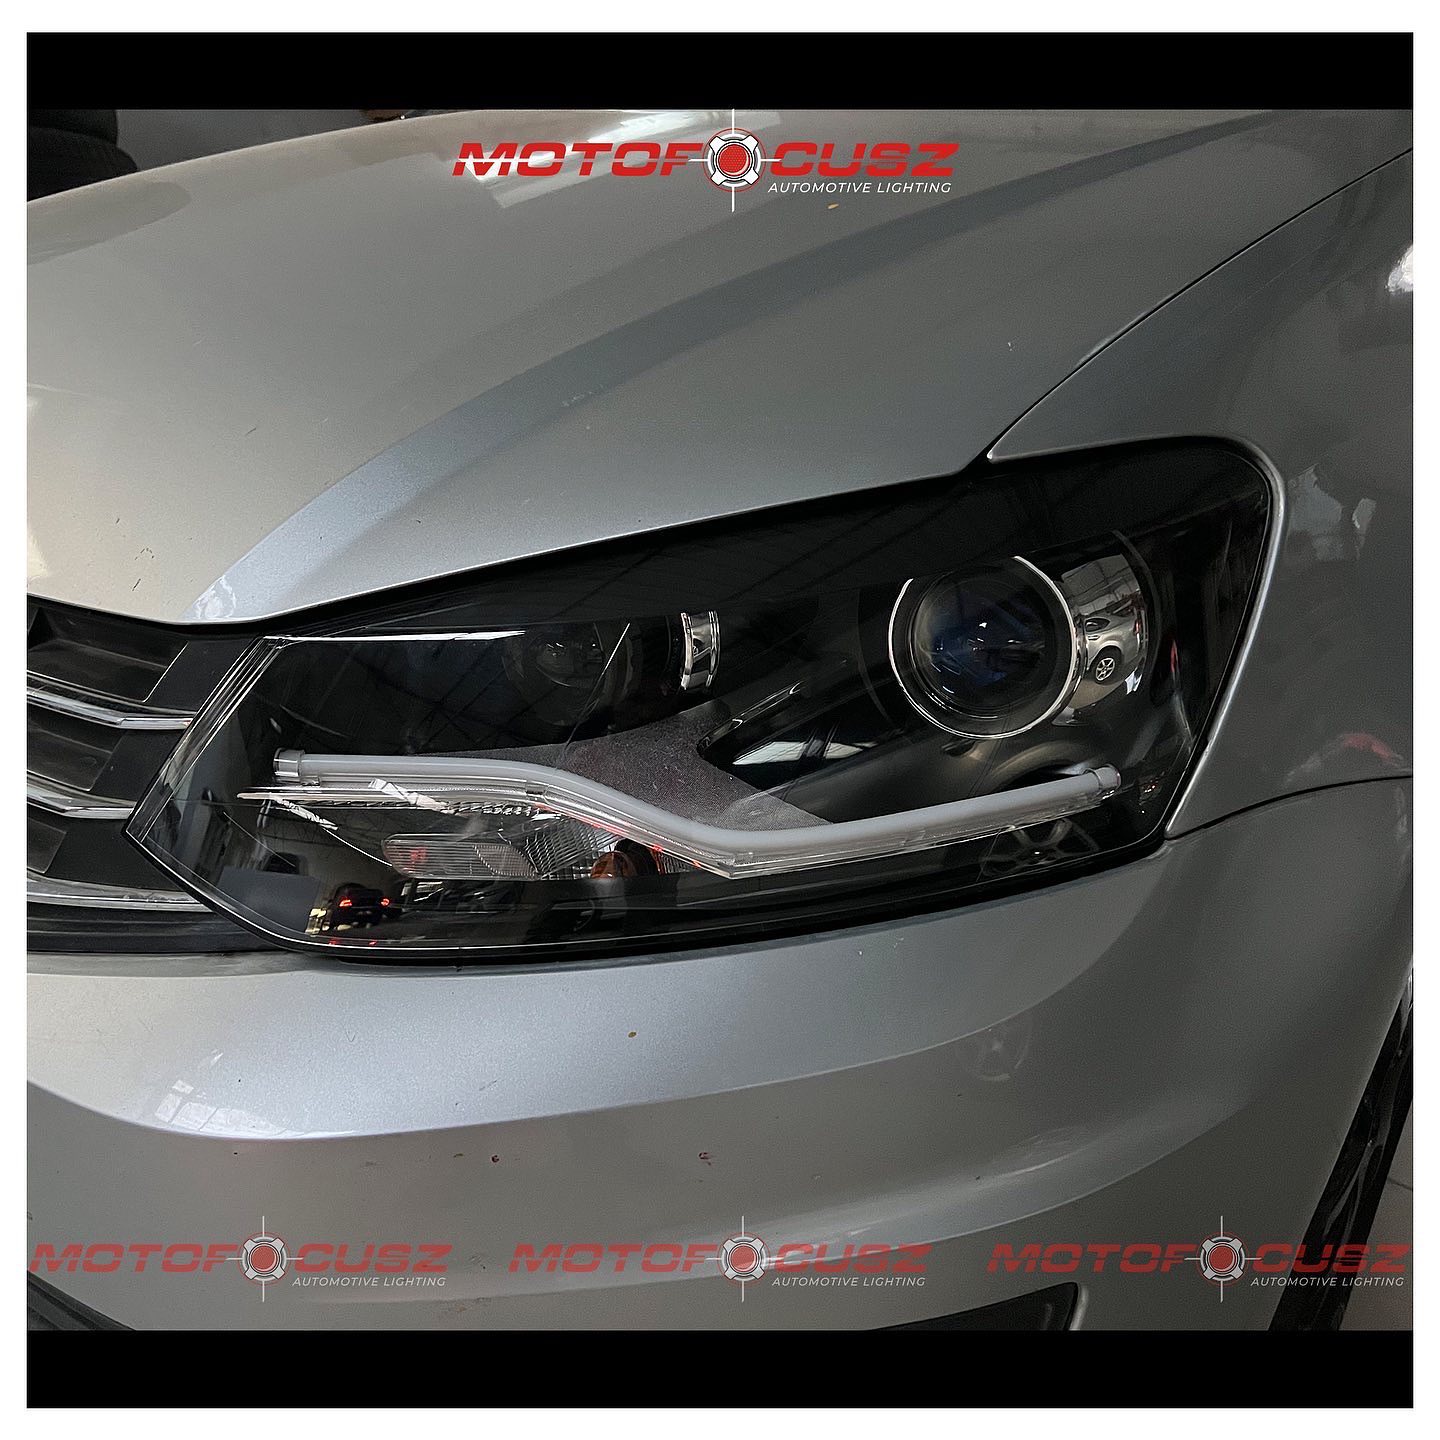 Volkswagen Vento came all the way from Tirunelveli for Hella G5 BRT projectors & switchback DRL upgrade from Motofocusz Best Headlight customisation in Chennai